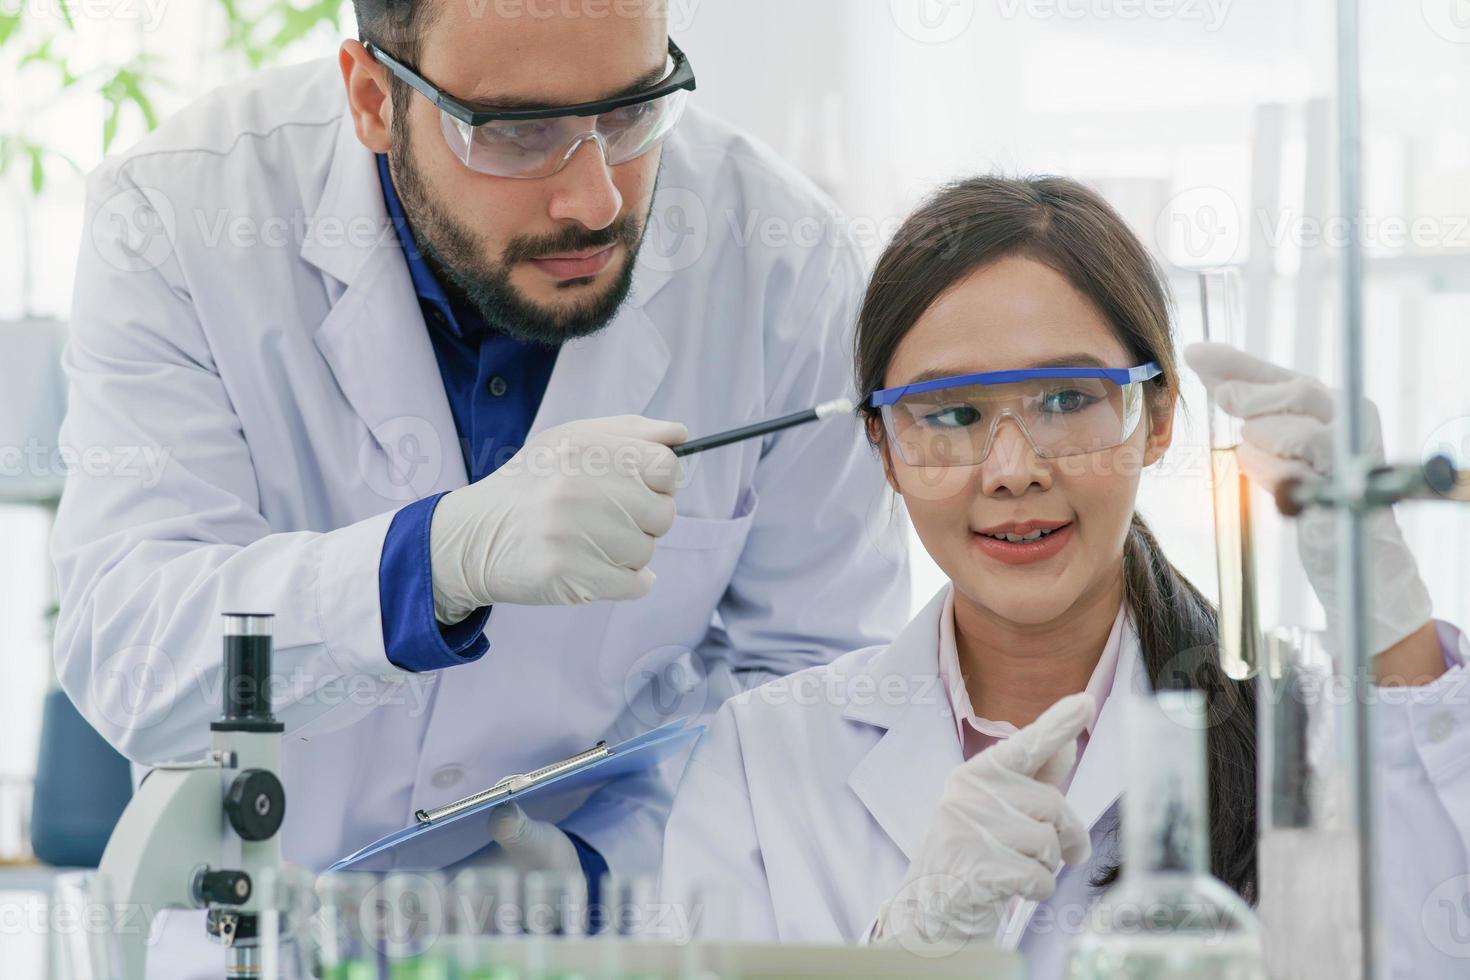 man-woman scientist with expertise in laboratory research biology discovery test tube analyzing extract biotechnology examining. Doctor student learning medical pharmacy chemist lab scientific. photo